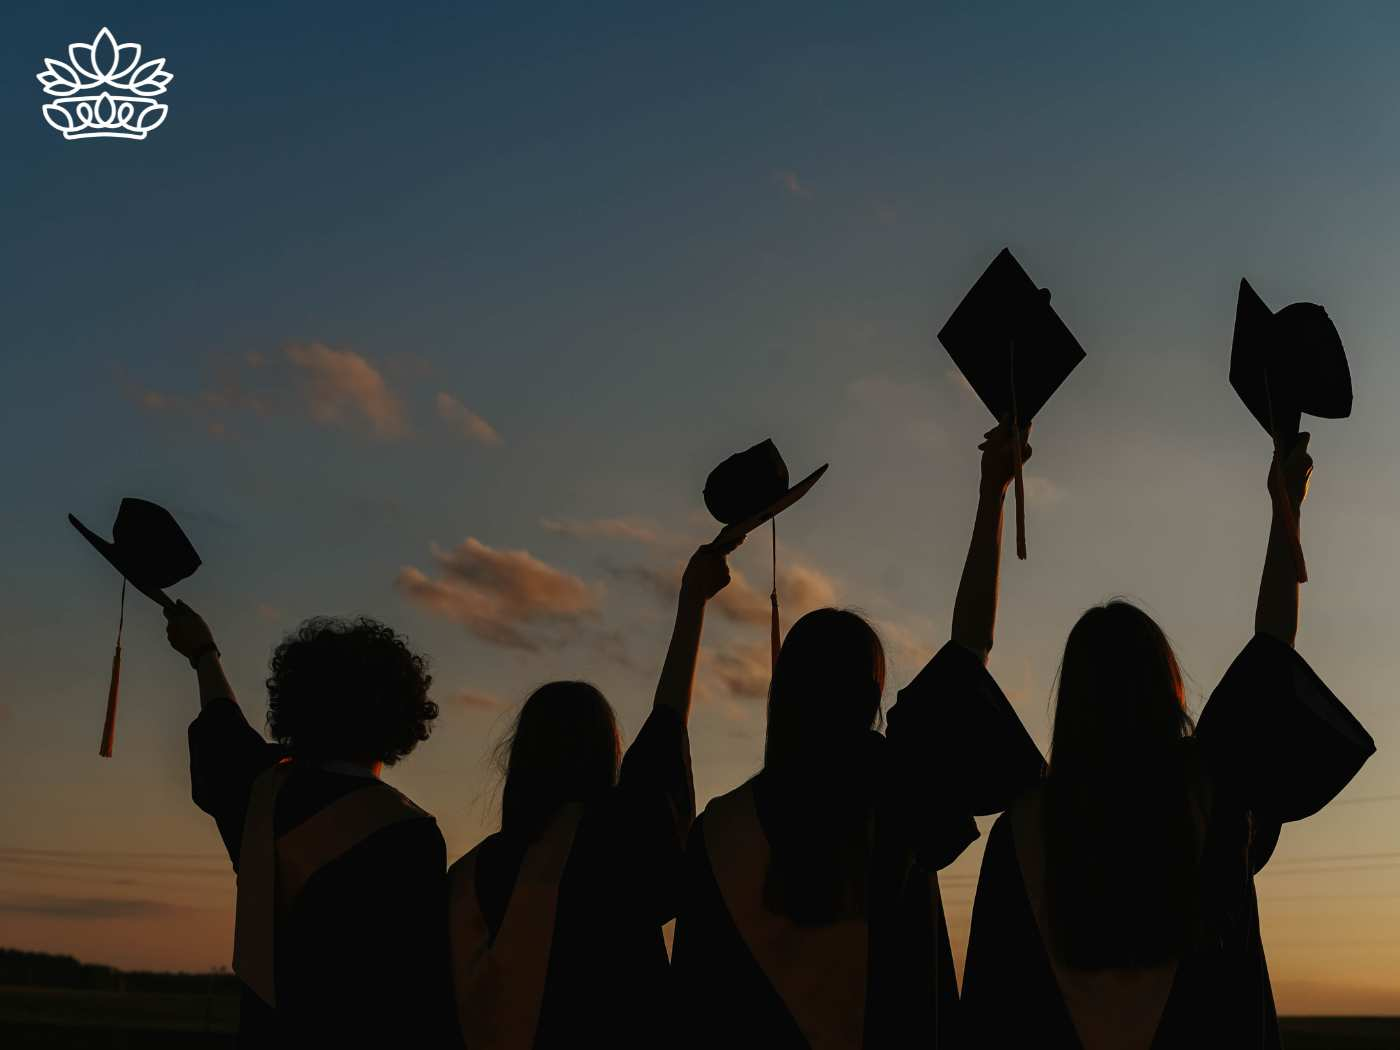 Silhouettes of graduates holding their mortarboards high against a vibrant sunset sky, symbolizing hope and achievement at the end of their academic journey. Graduation. Delivered with Heart. Fabulous Flowers and Gifts.